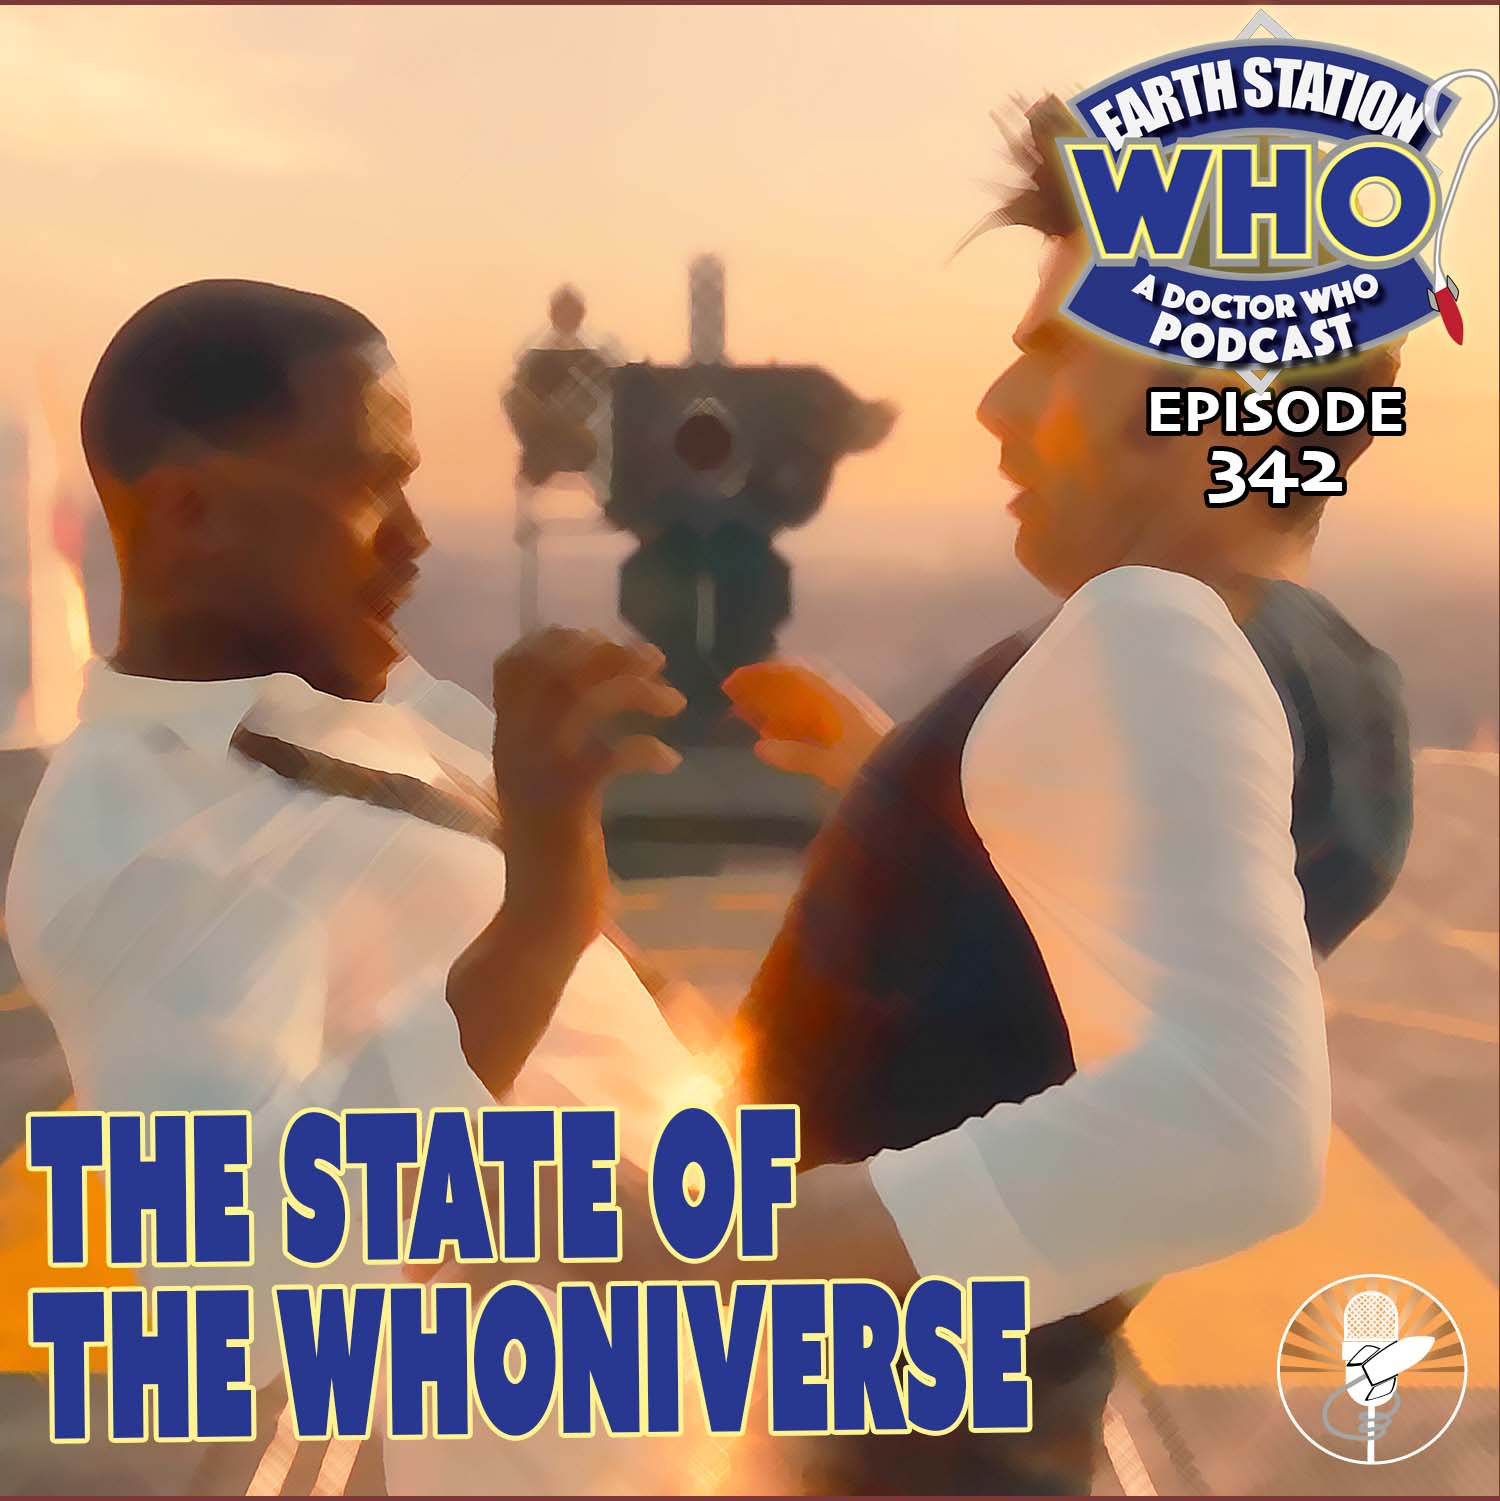 Earth Station Who Ep 342 - The State of the Whoniverse